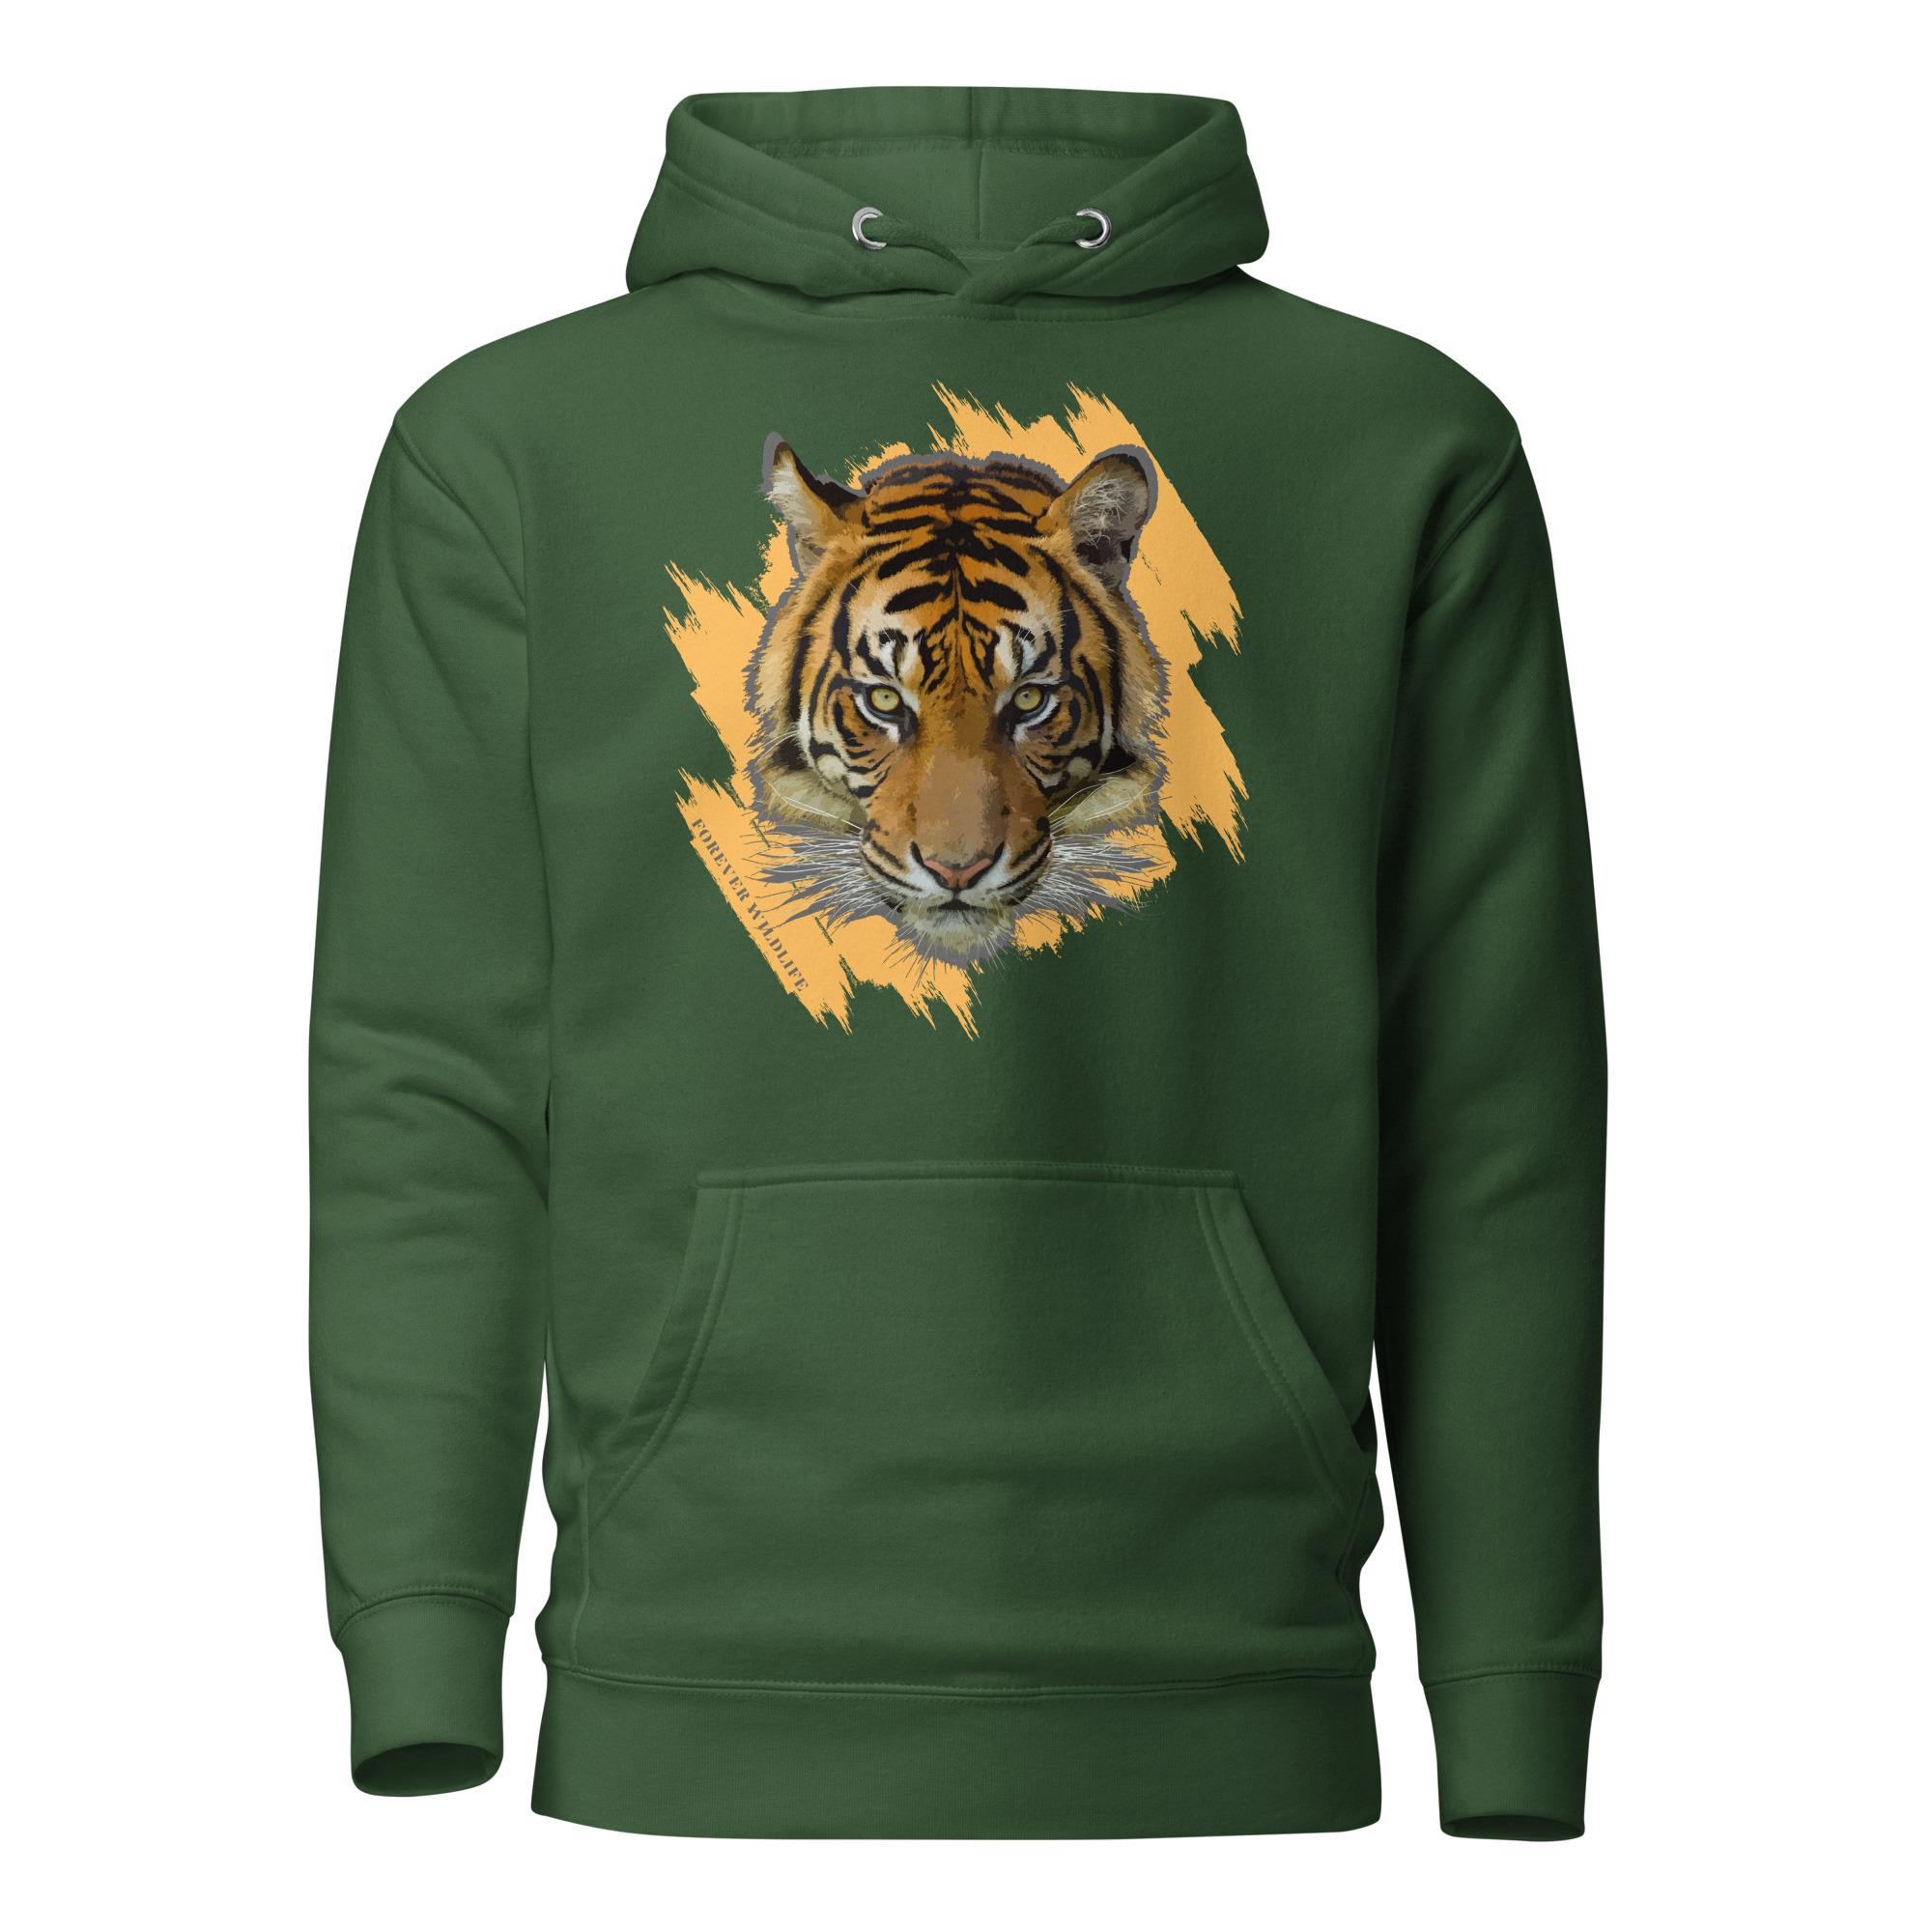 Tiger Face Hoodie in Forest Green – Premium Wildlife Animal Inspirational Hoodie Design, part of Wildlife Hoodies & Clothing from Forever Wildlife